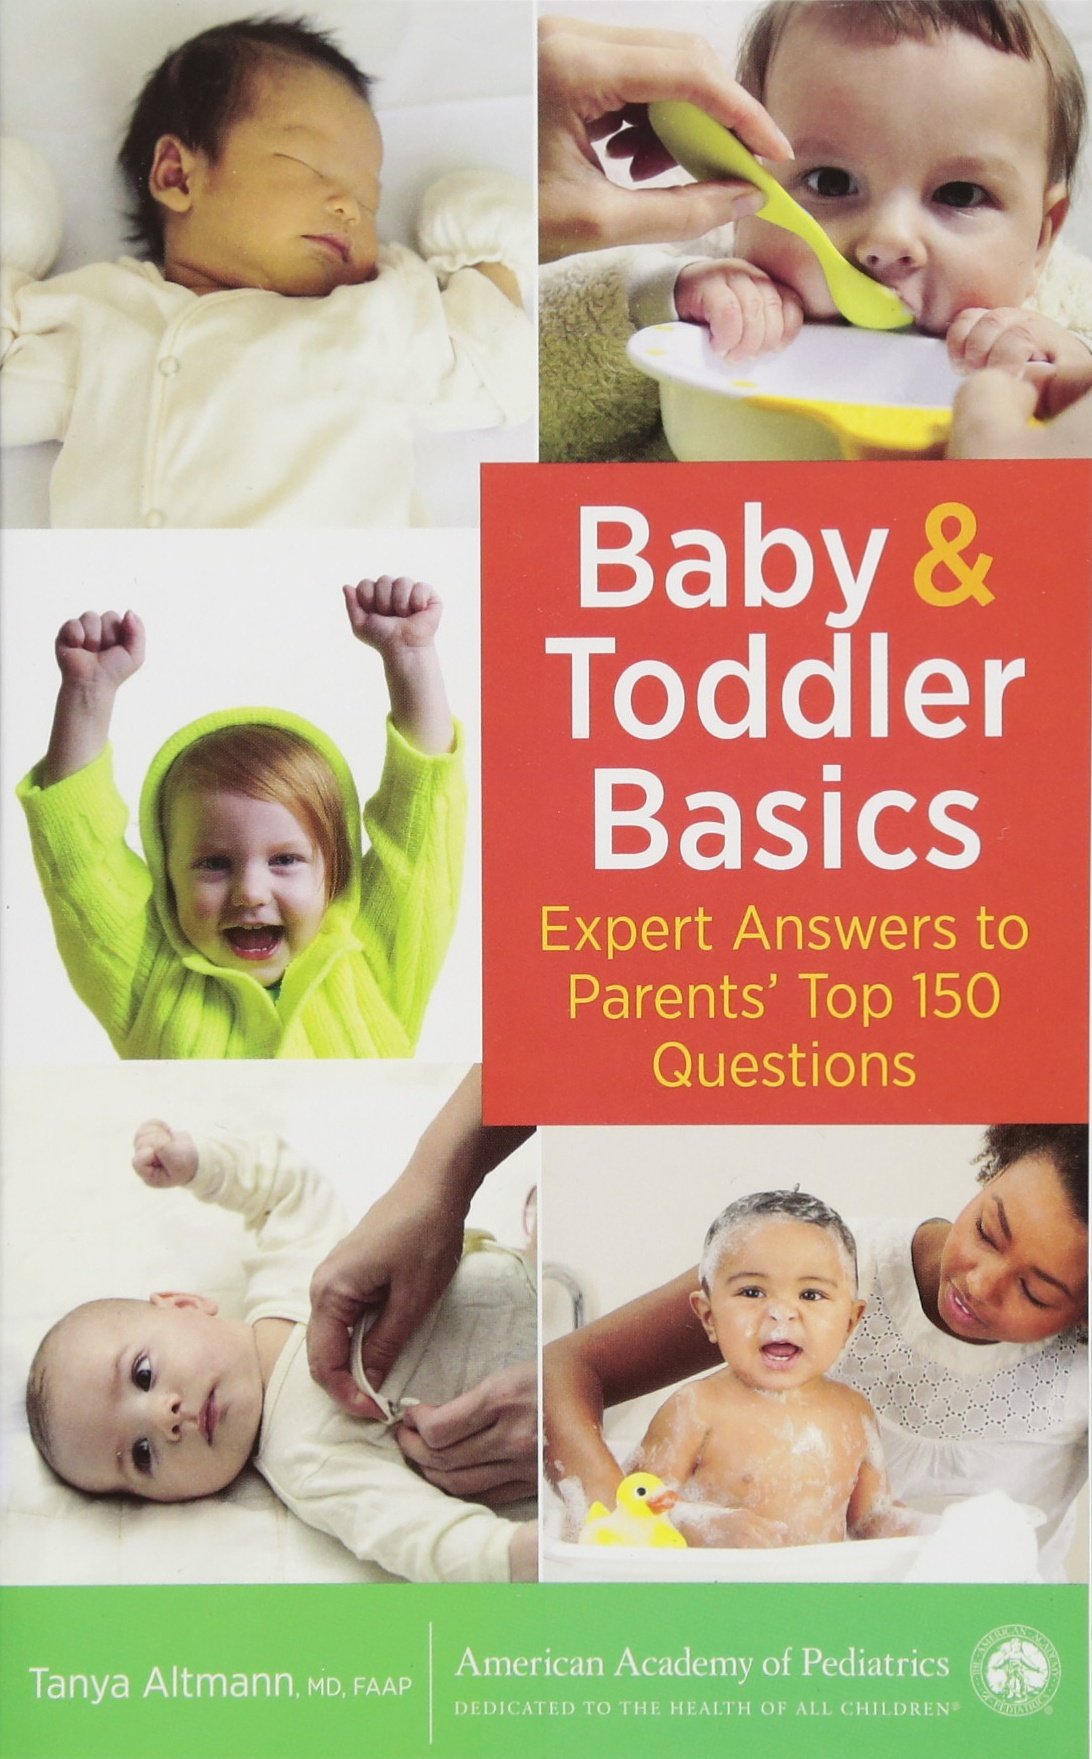 Image for "Baby and Toddler Basics"